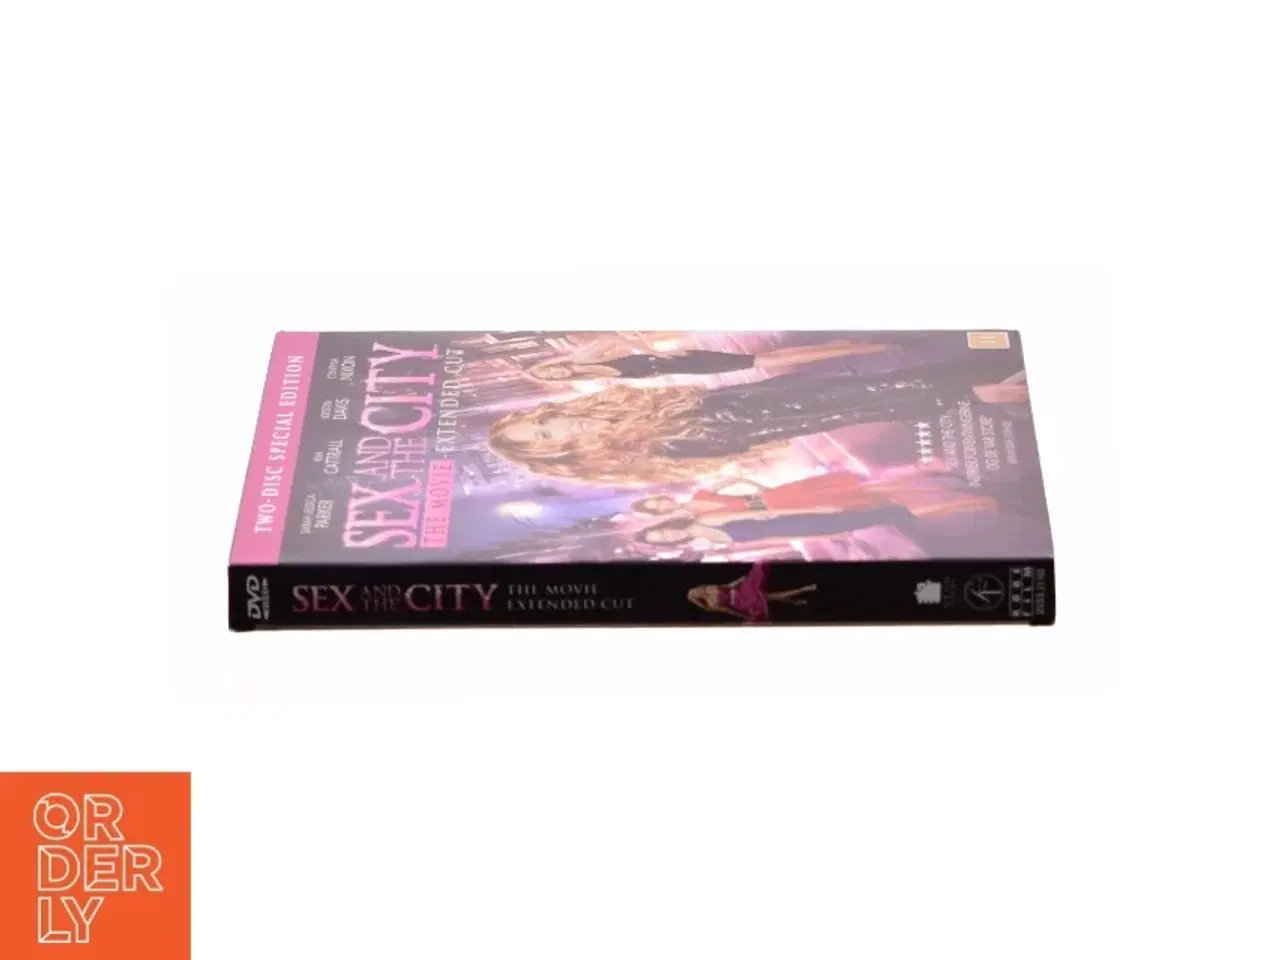 Billede 3 - Sex and the City (2disc Version)